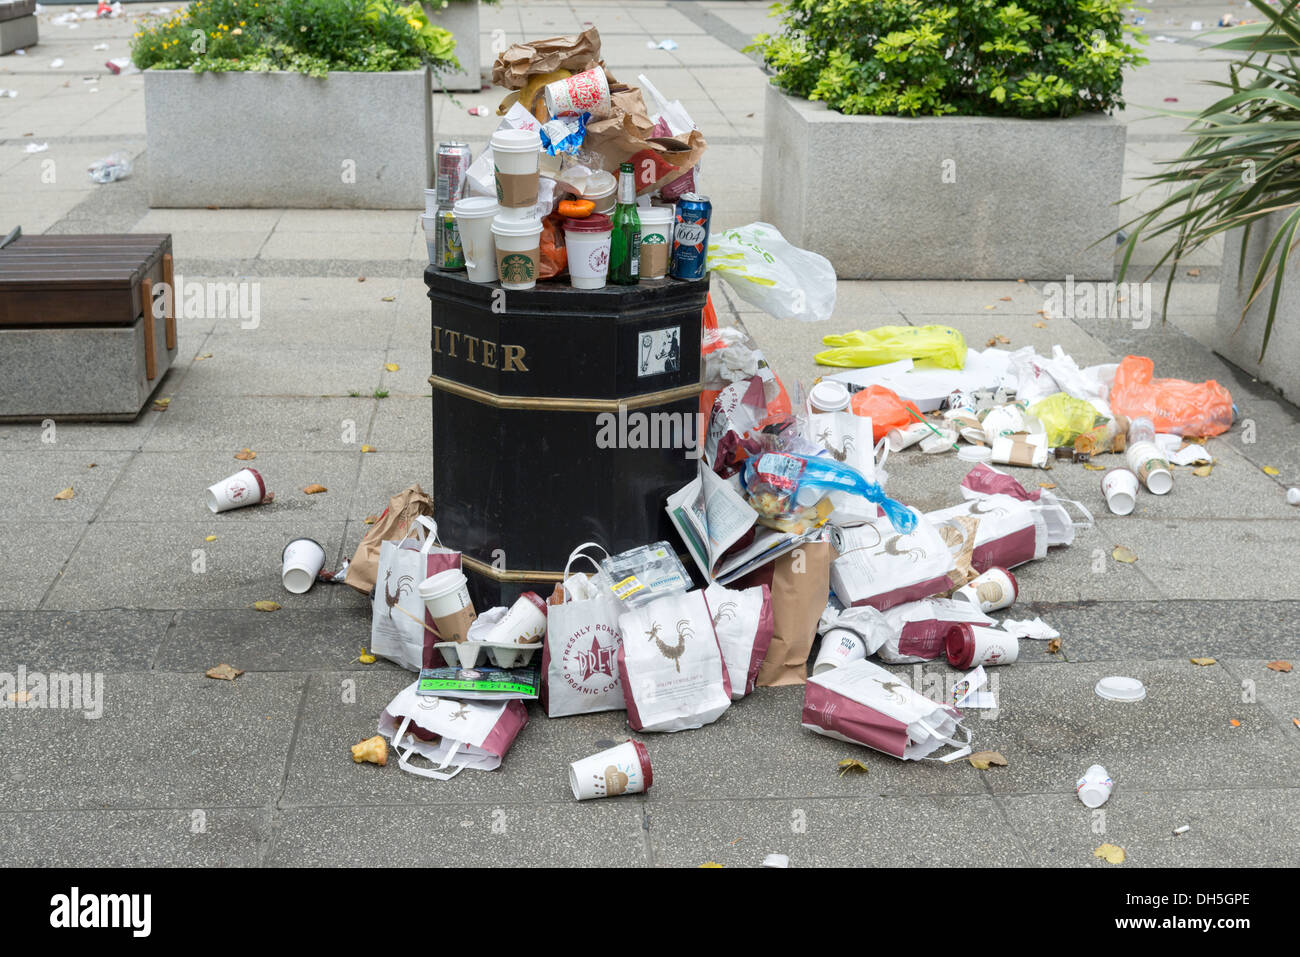 Takeaway bags and drinks containers overflowing from litter bin, London, England, UK Stock Photo